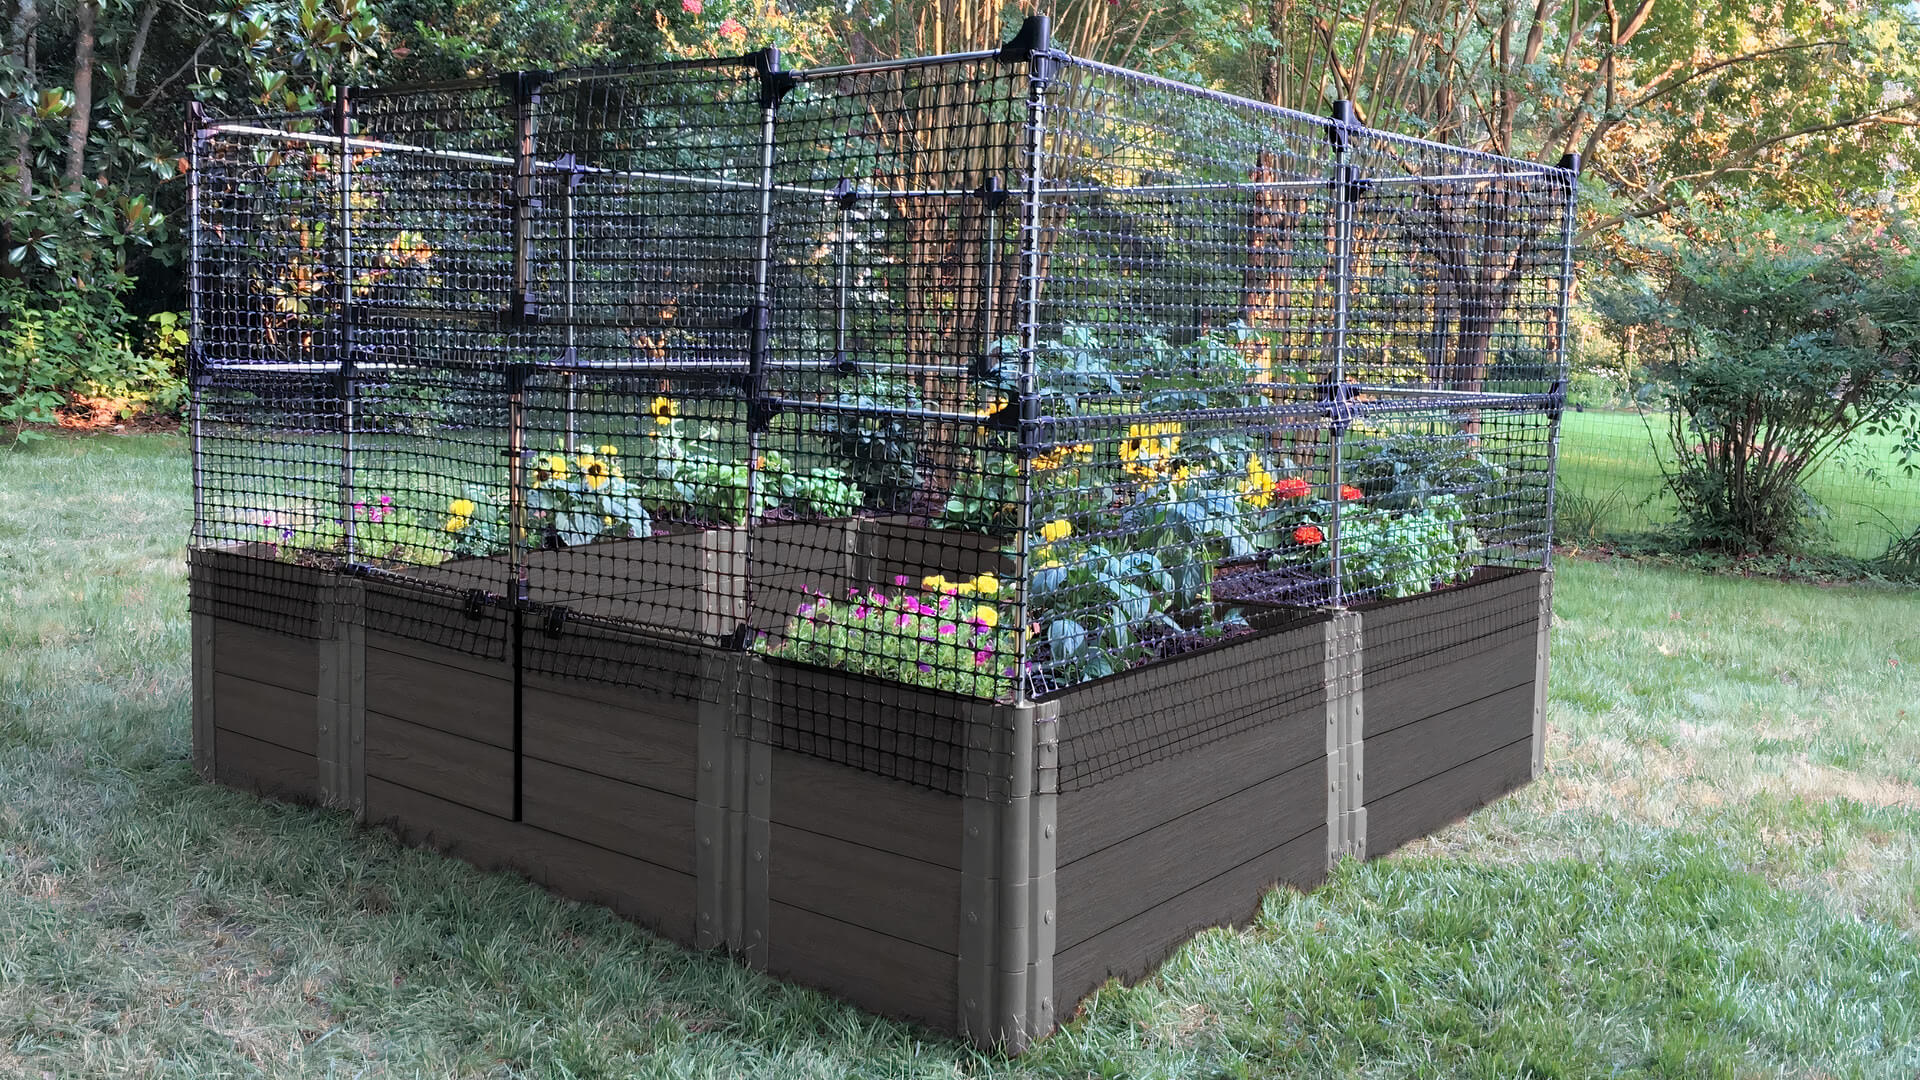 Walk-In 'Alamo' 8' x 8' Animal Barrier Raised Garden Bed - 2" Profile Raised Garden Beds Frame It All Weathered Wood 2 Inch 4 Levels = 22 Inches 4 Foot